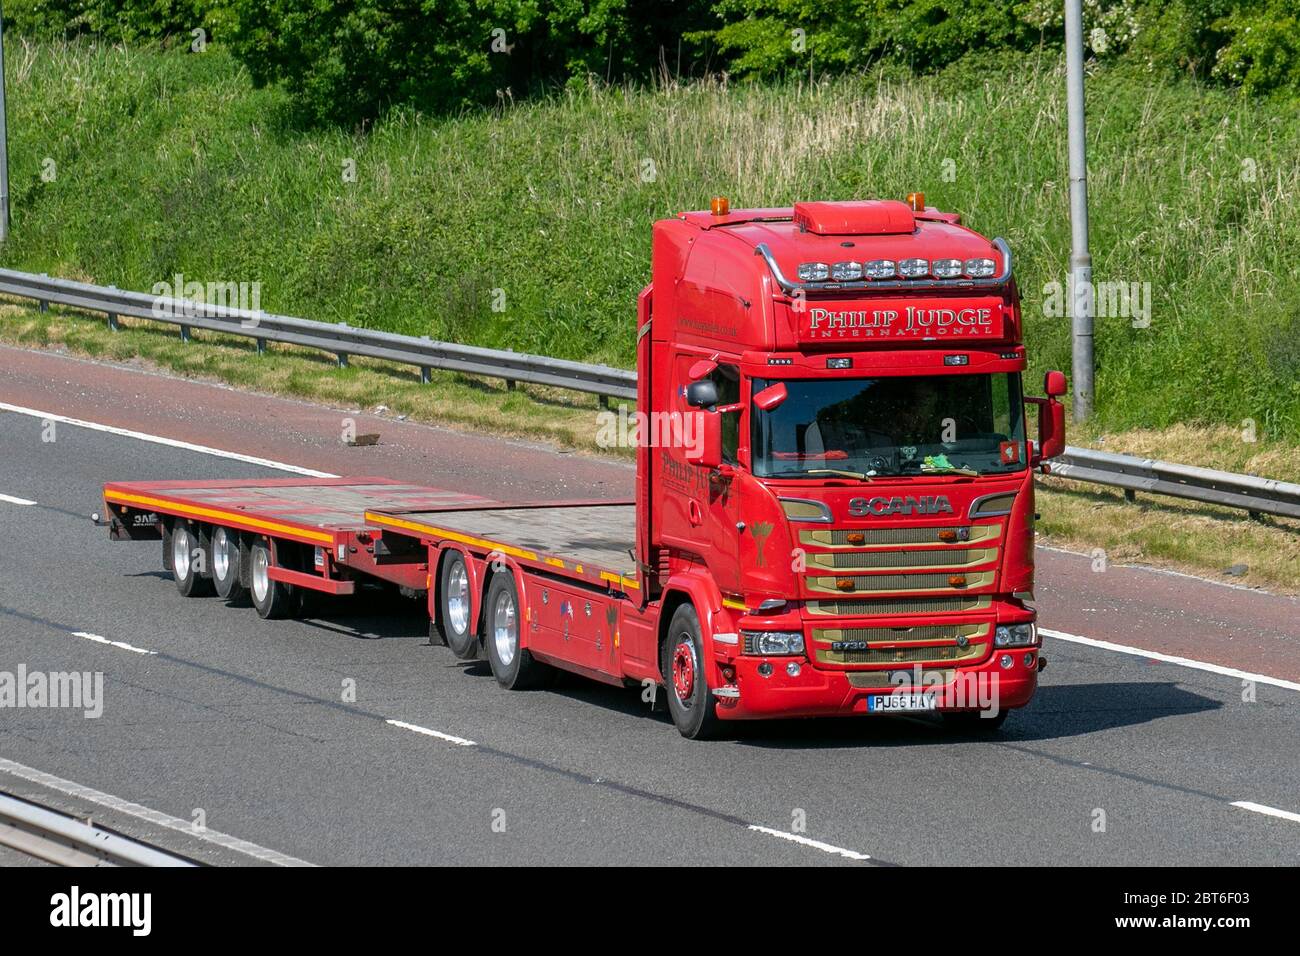 Philip Judge International; Haulage delivery trucks, lorry, transportation, truck, cargo carrier, red Scania R730 vehicle, European commercial transport, industry, M6 at Manchester, UK Stock Photo